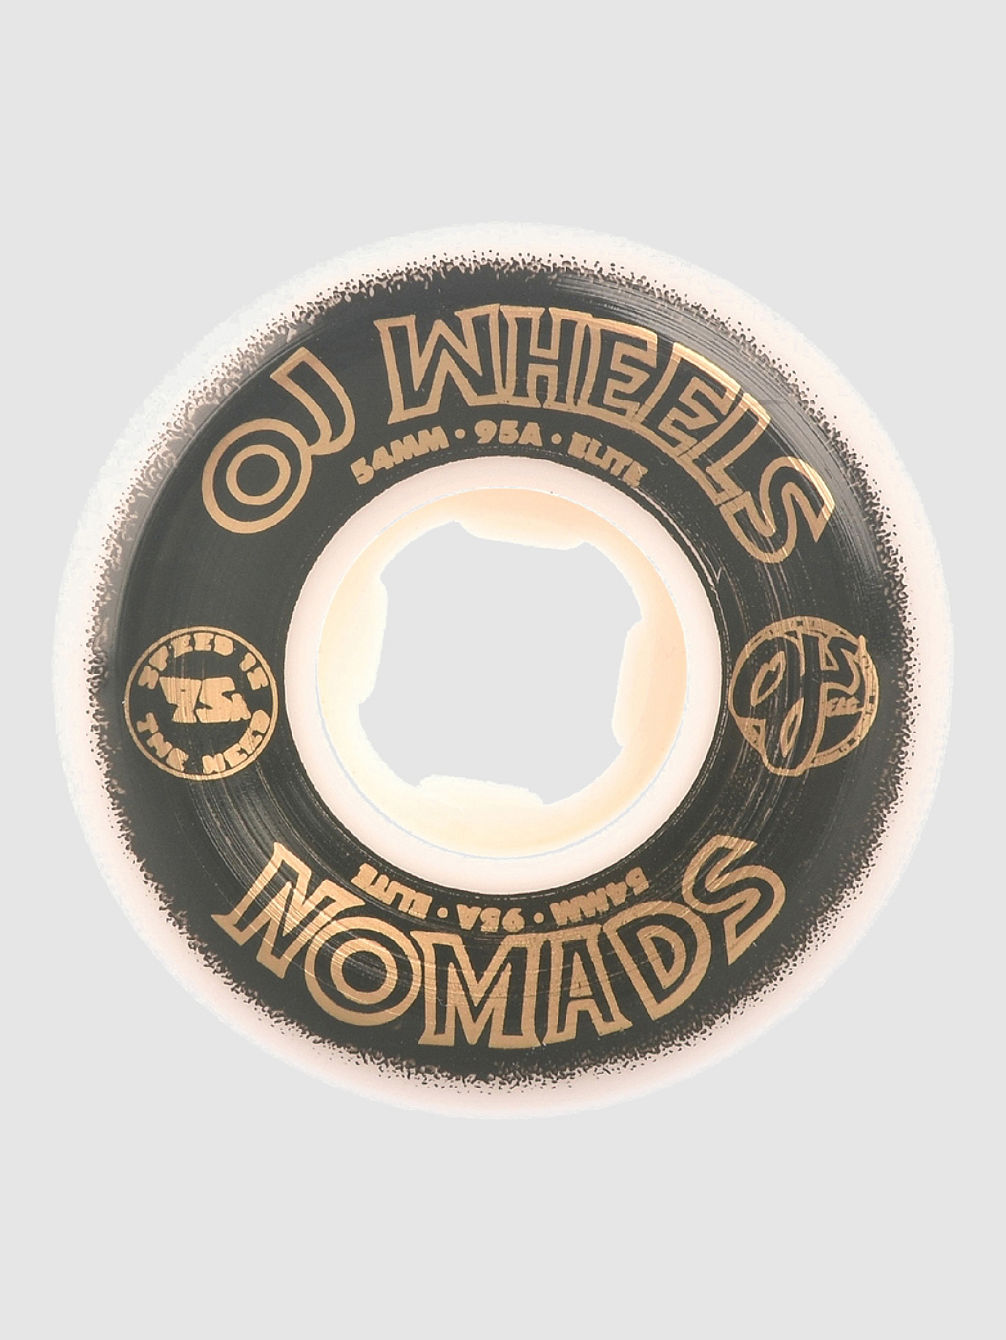 Elite Nomads 95A 54mm Roues